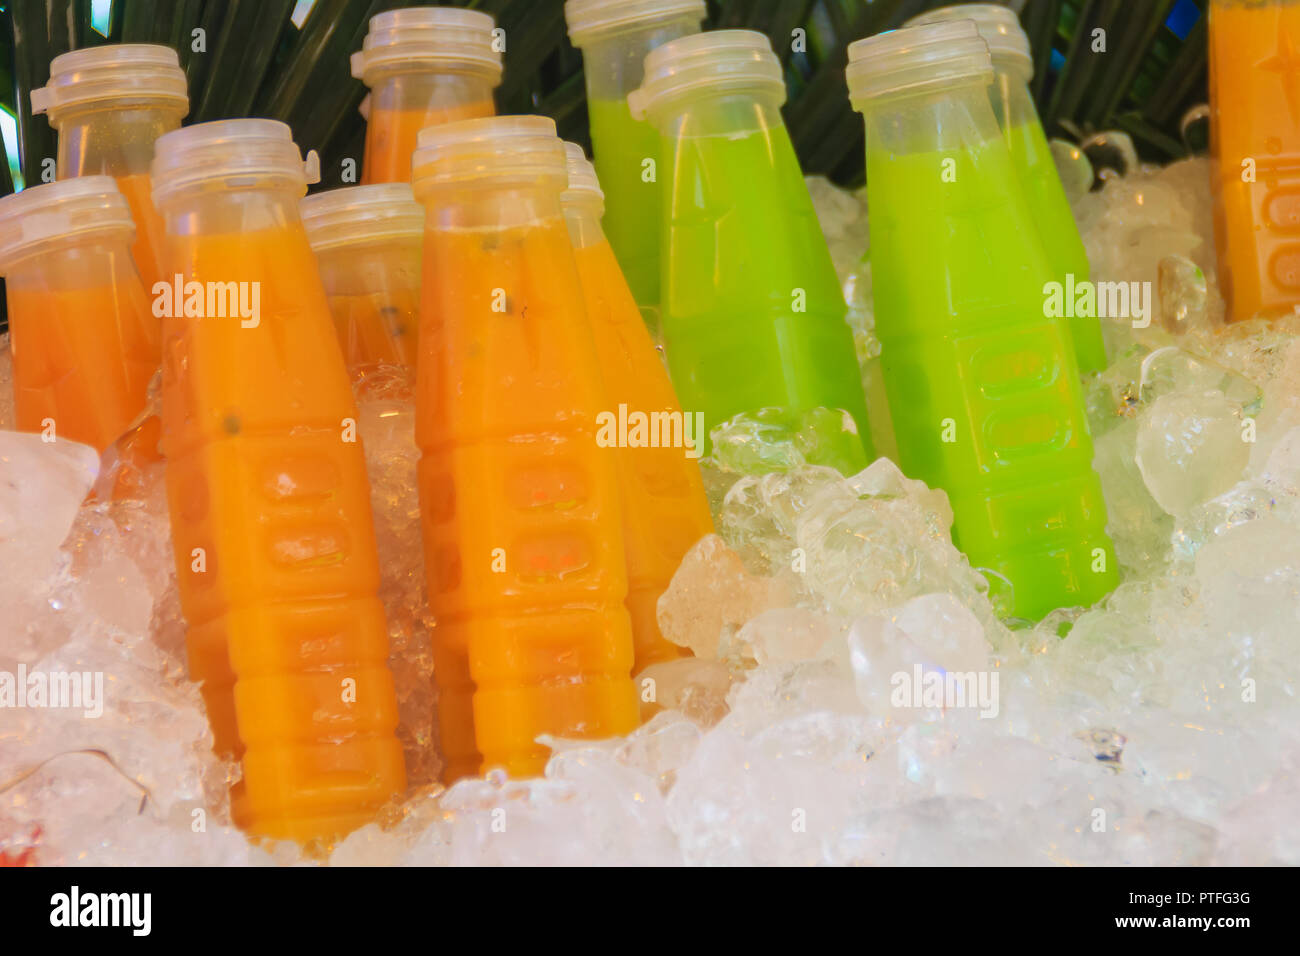 How To Bottle Juices For Sale